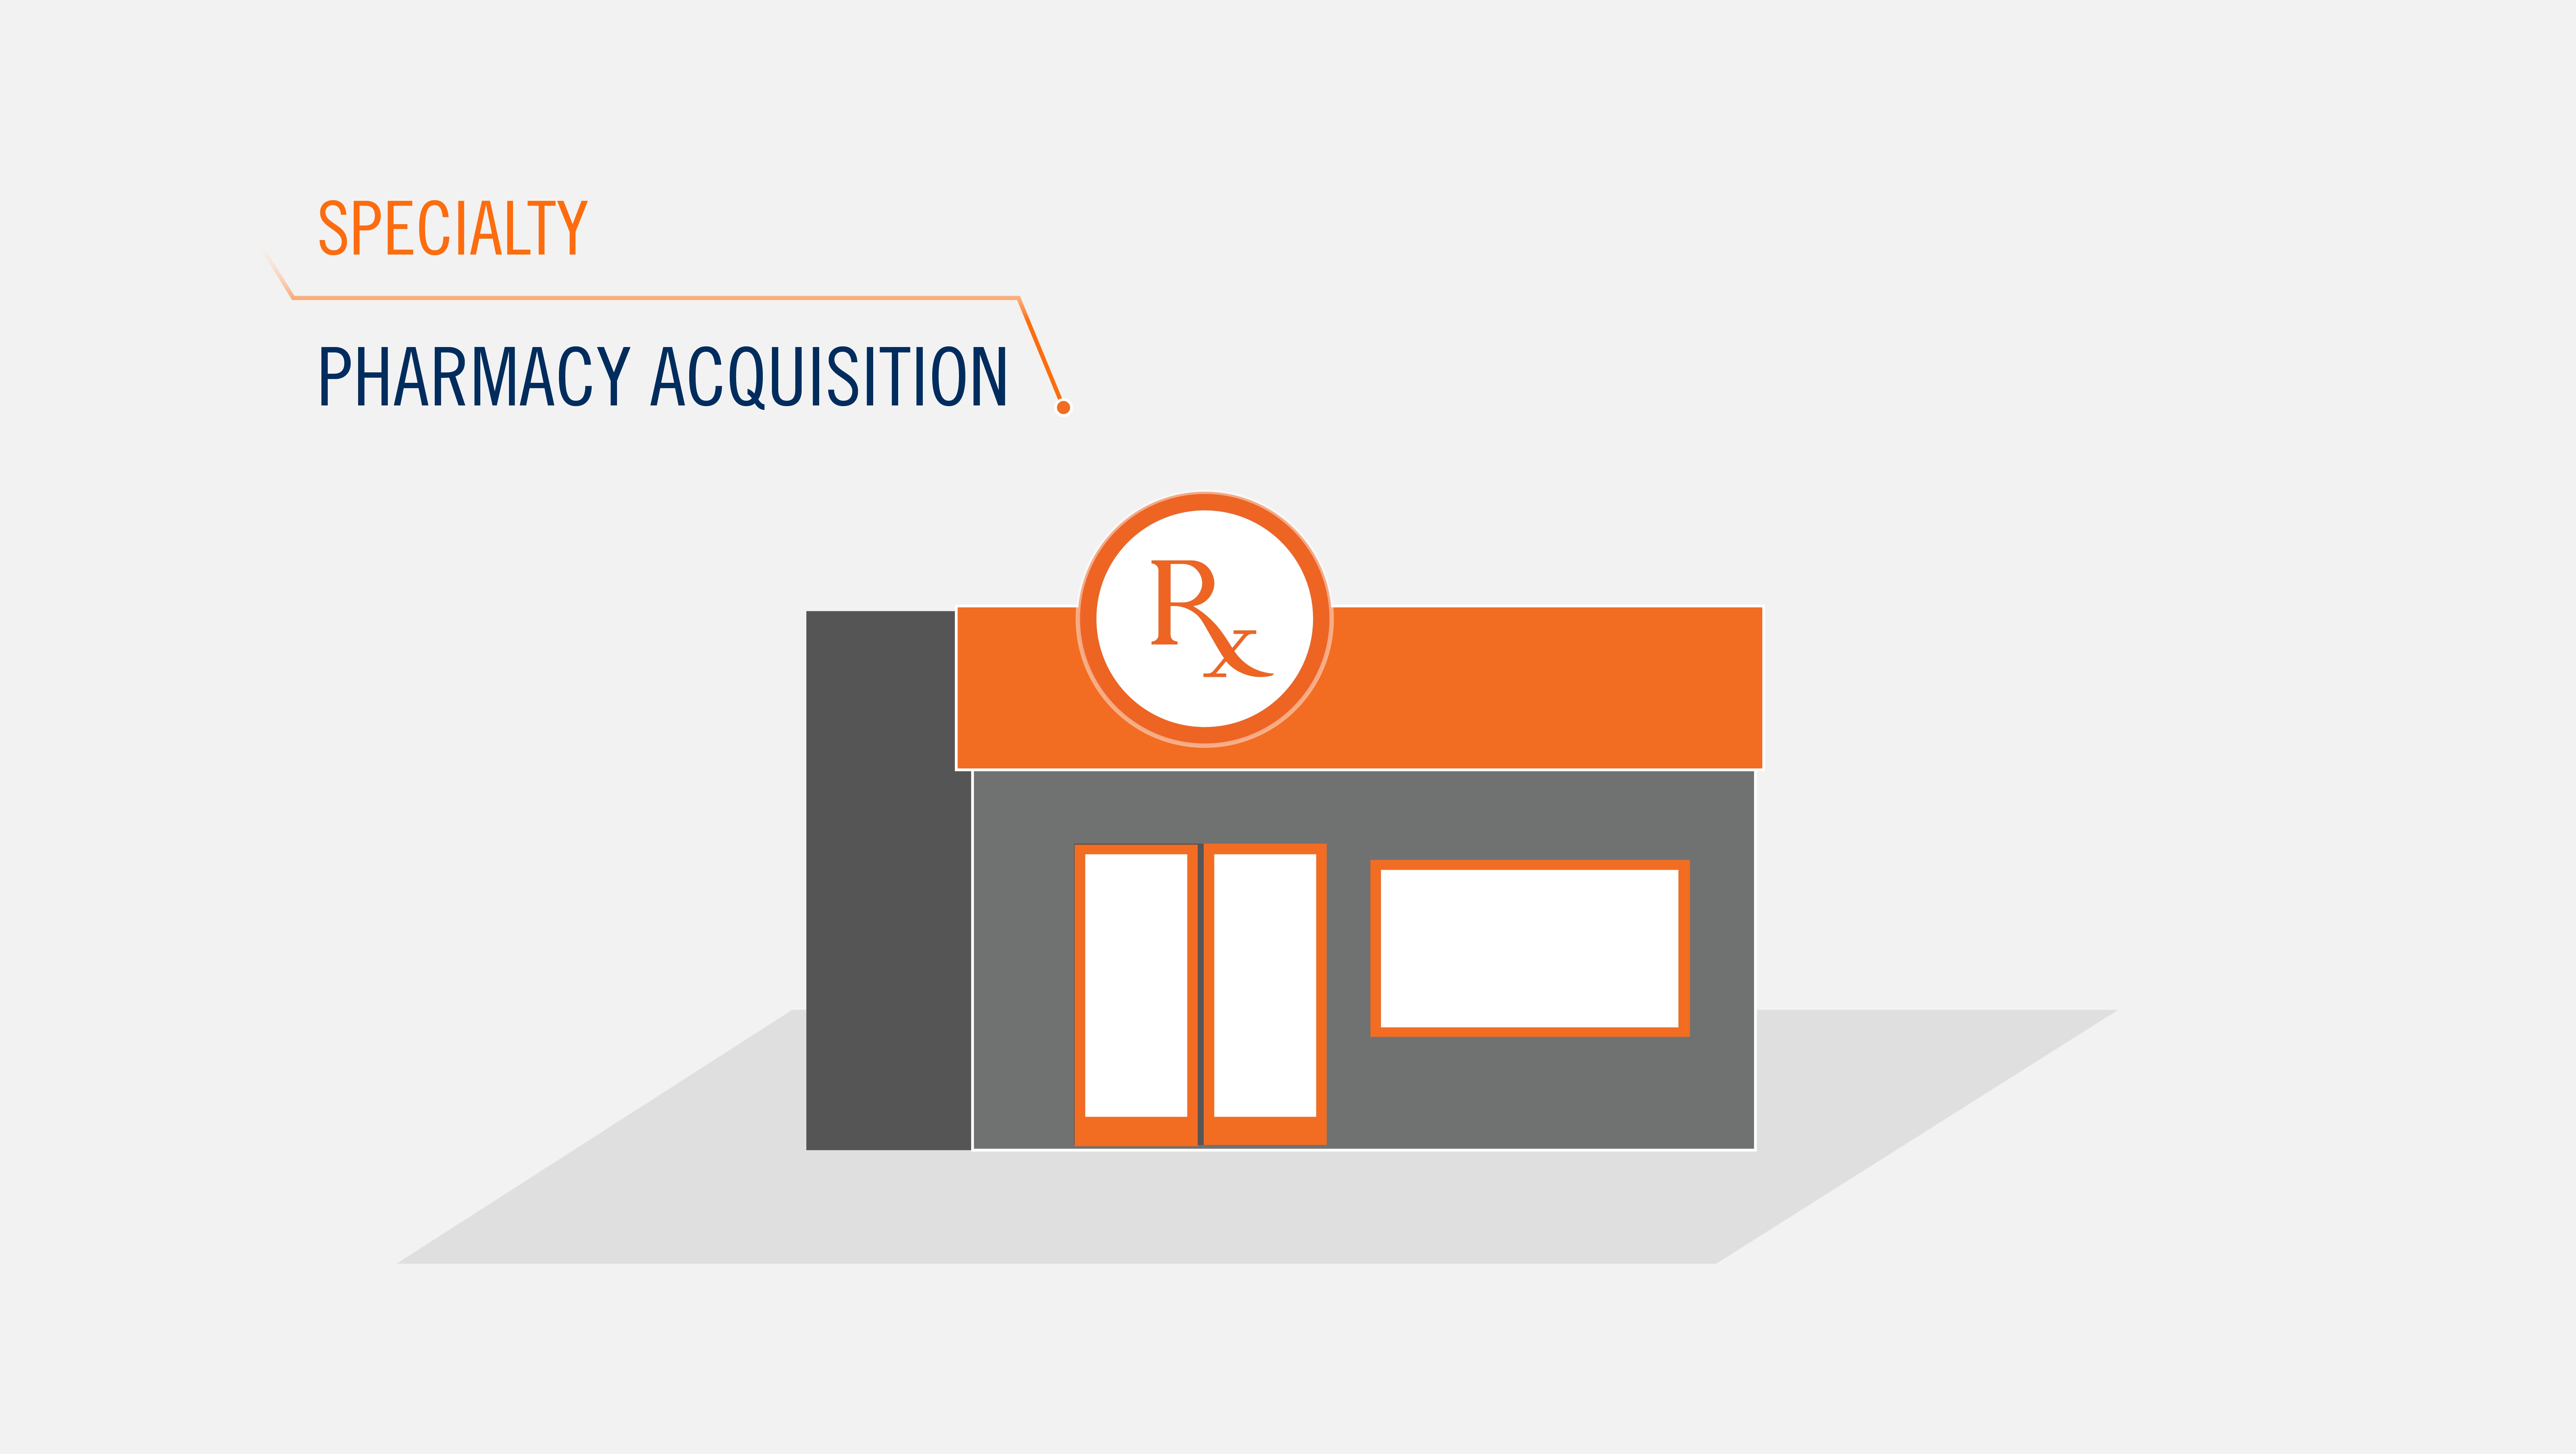 XIAFLEX® acquisition support  - Specialty Pharmacy video thumbnail